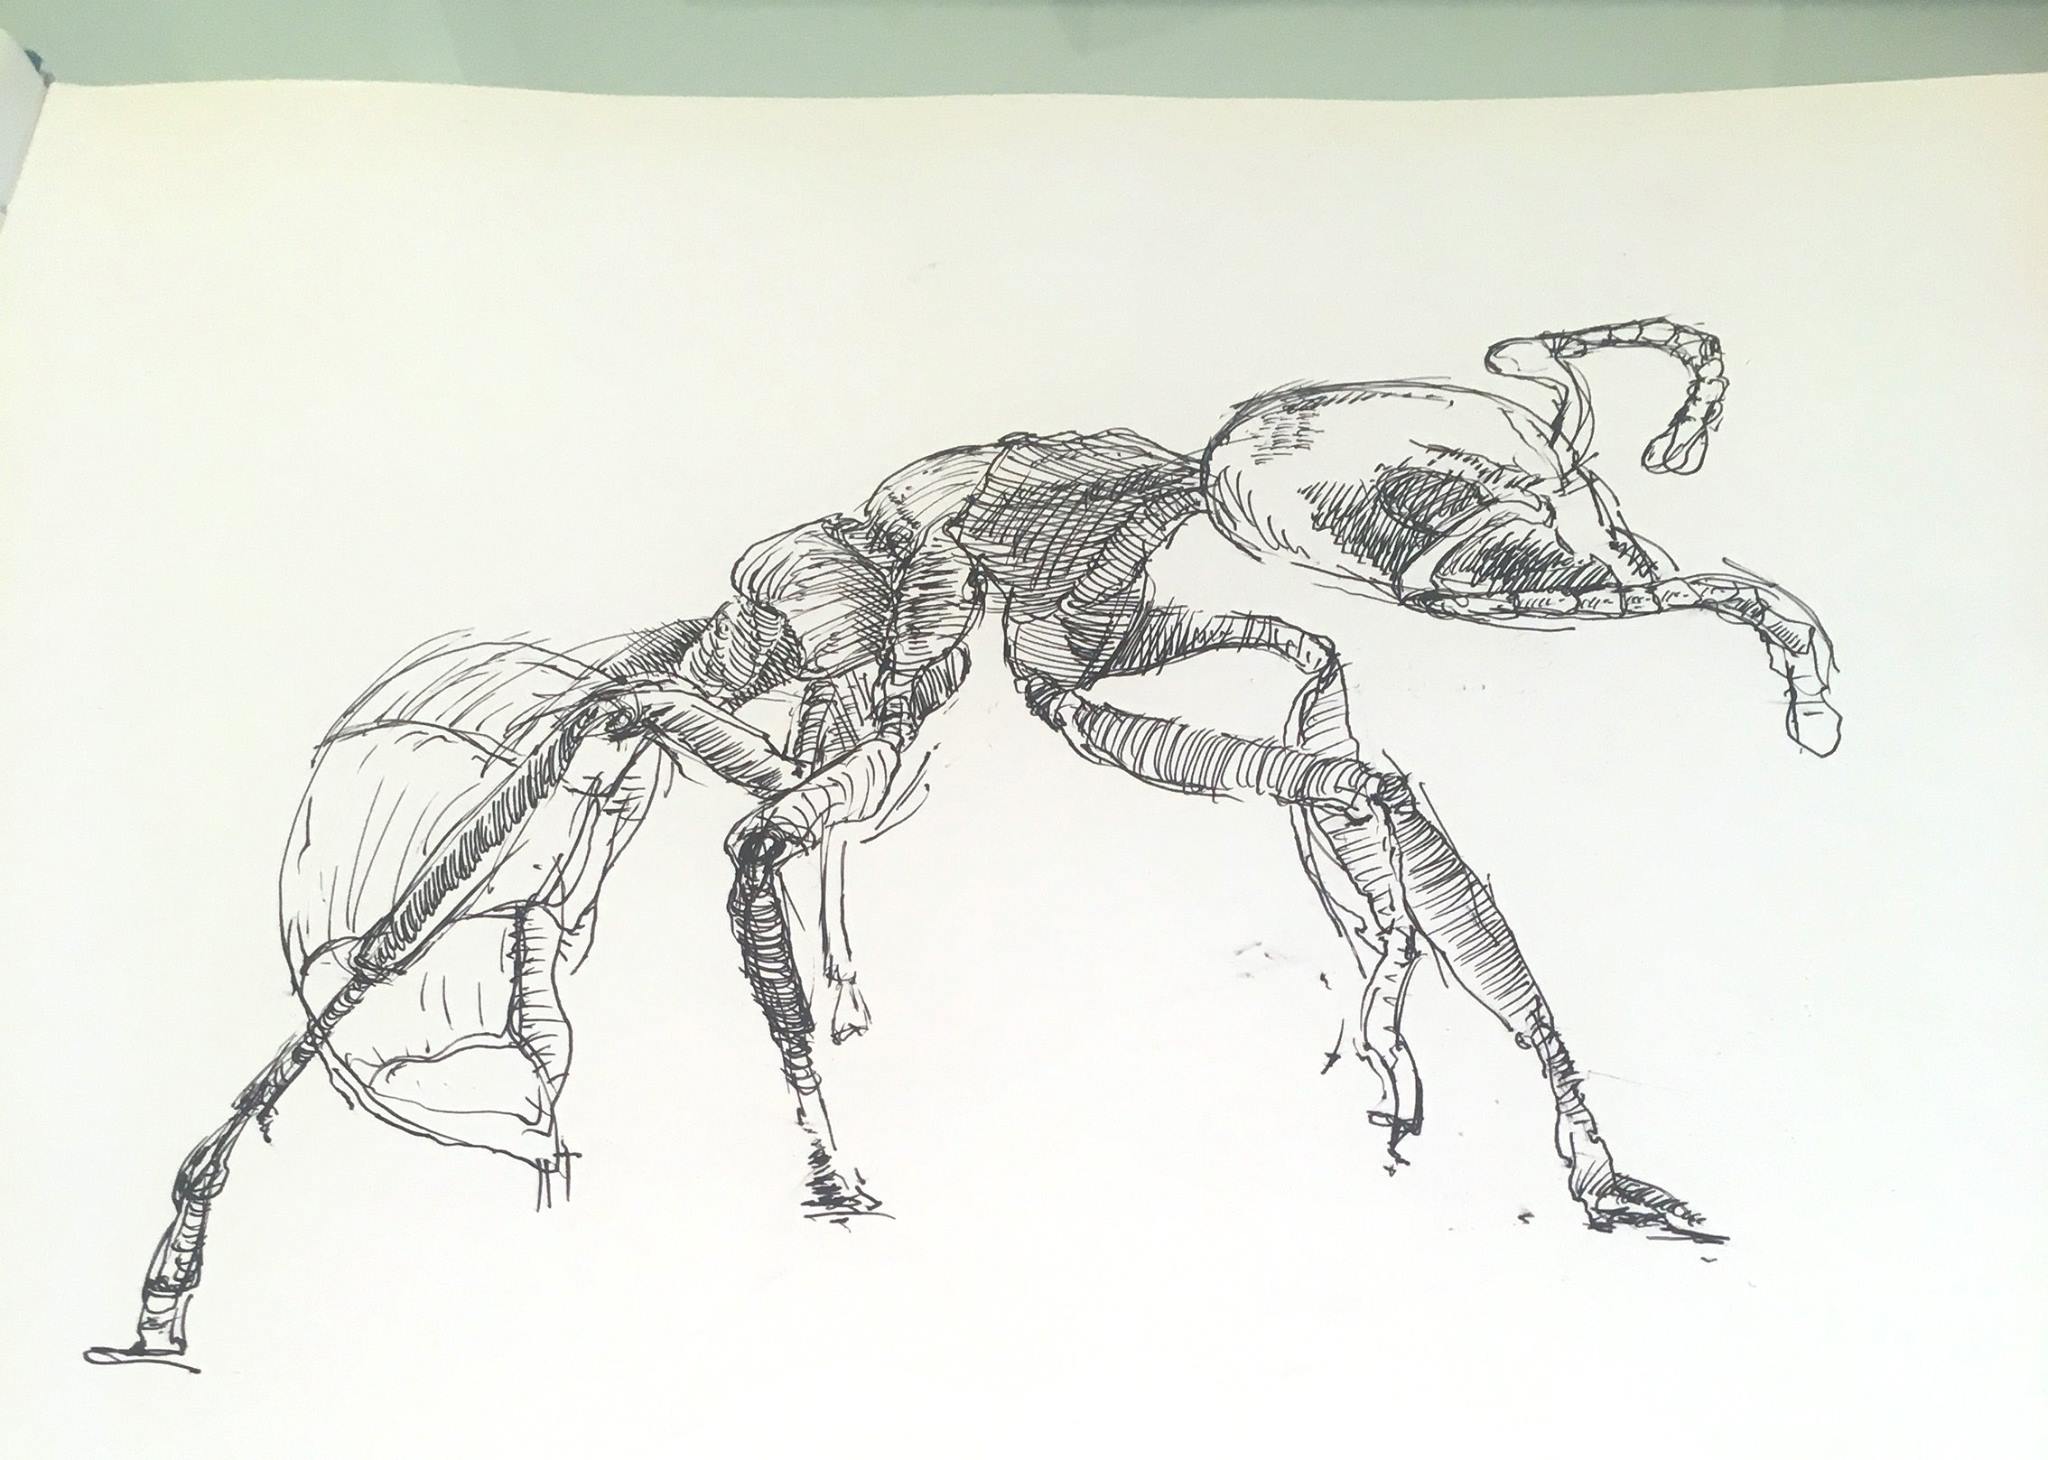 Drawing ants today